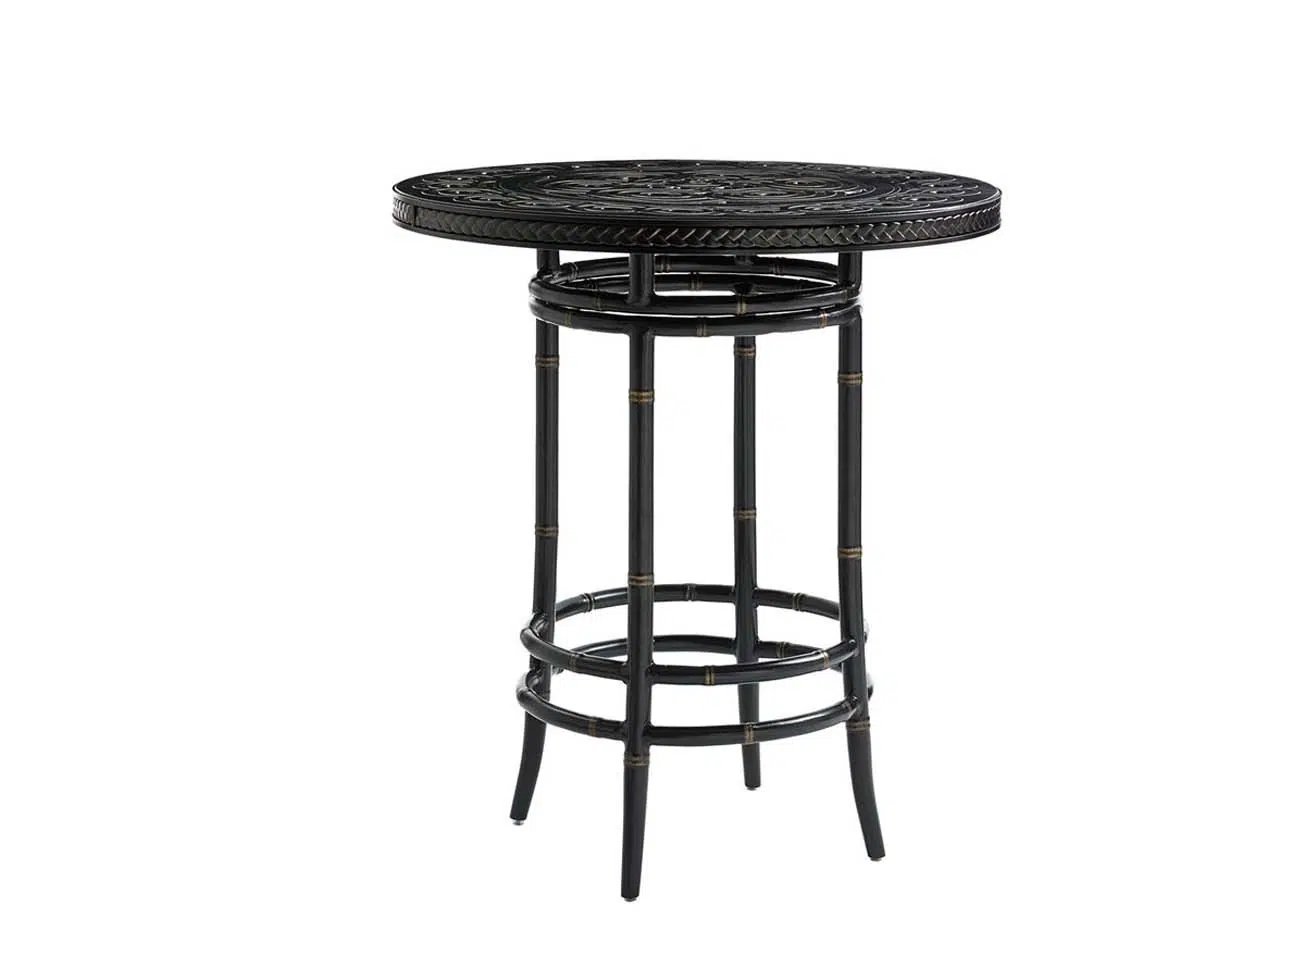 Marimba highlow bistro table base from hausers patio in san diego ca luxury outdoor living by hausers patio luxury outdoor living by hausers patio